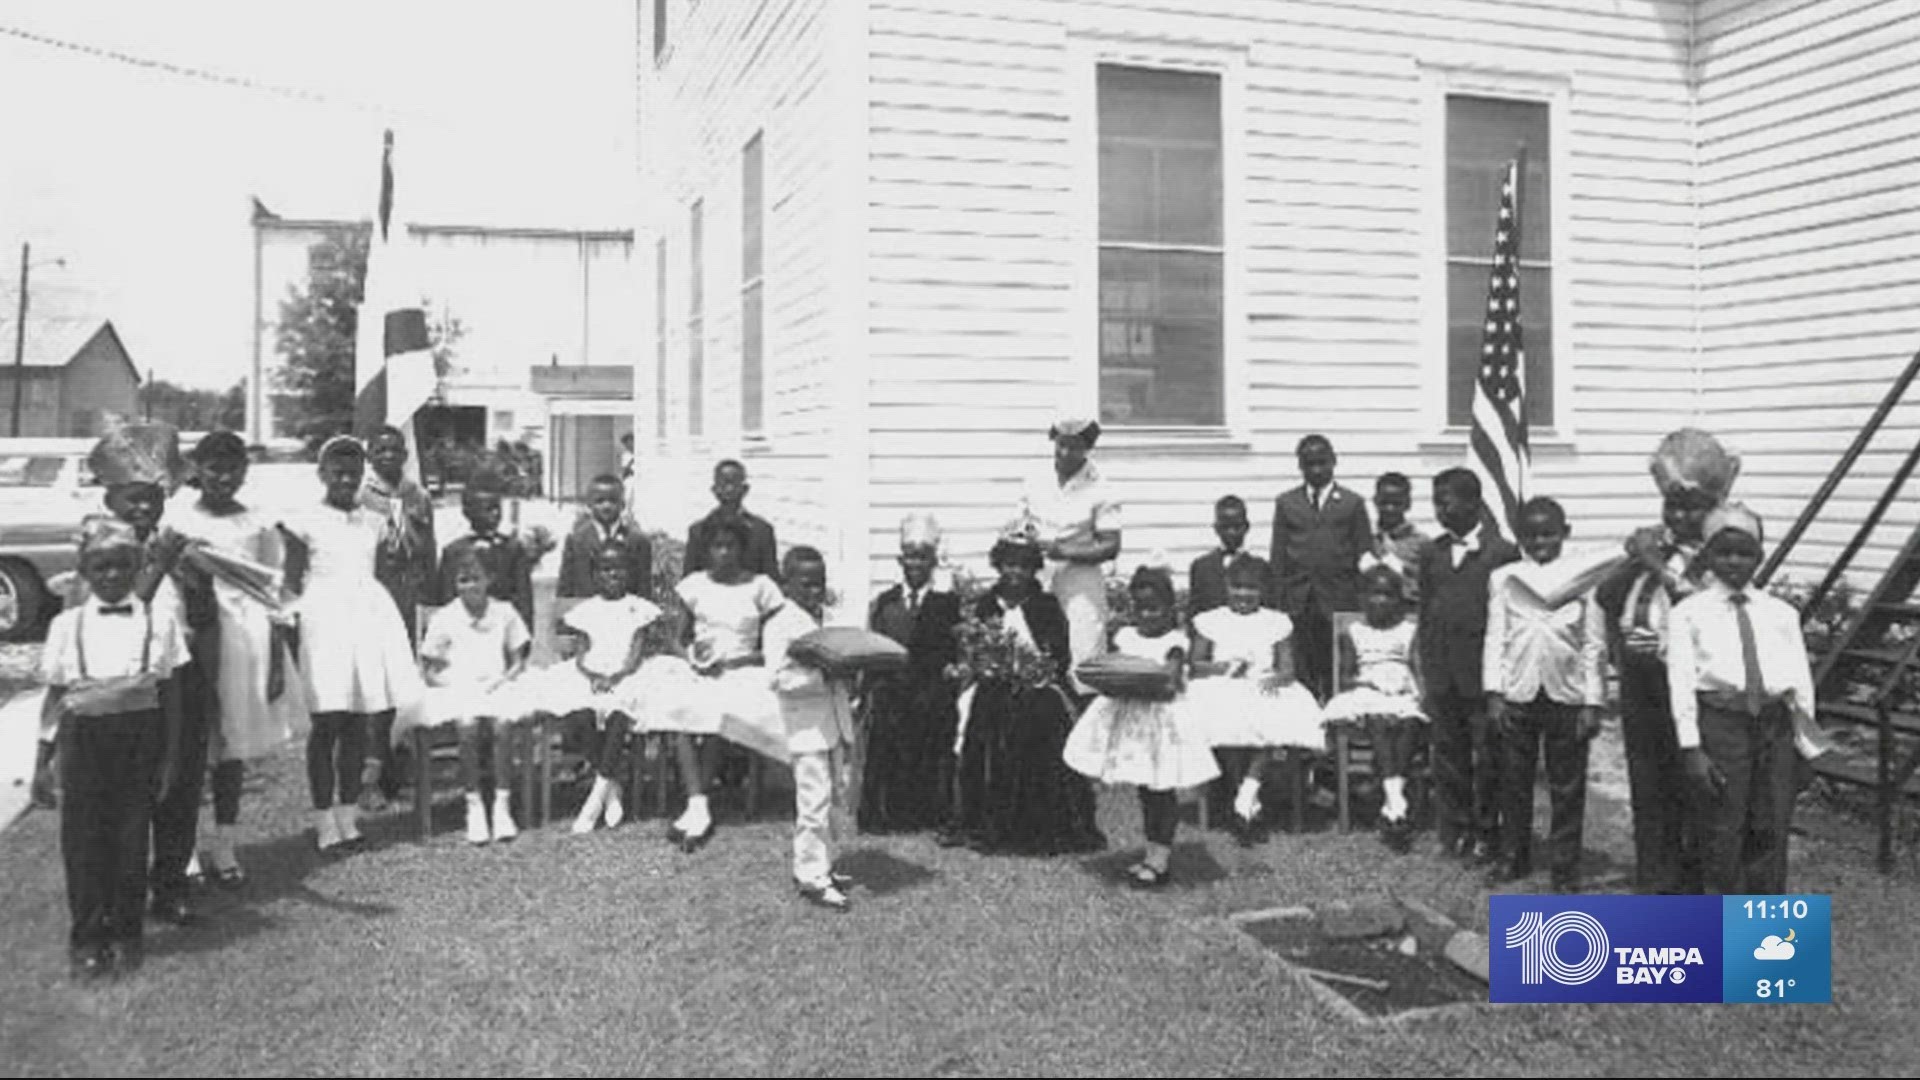 The next event will be focused on Tampa's first Black churches. That'll be at 6 p.m. on Dec. 14.